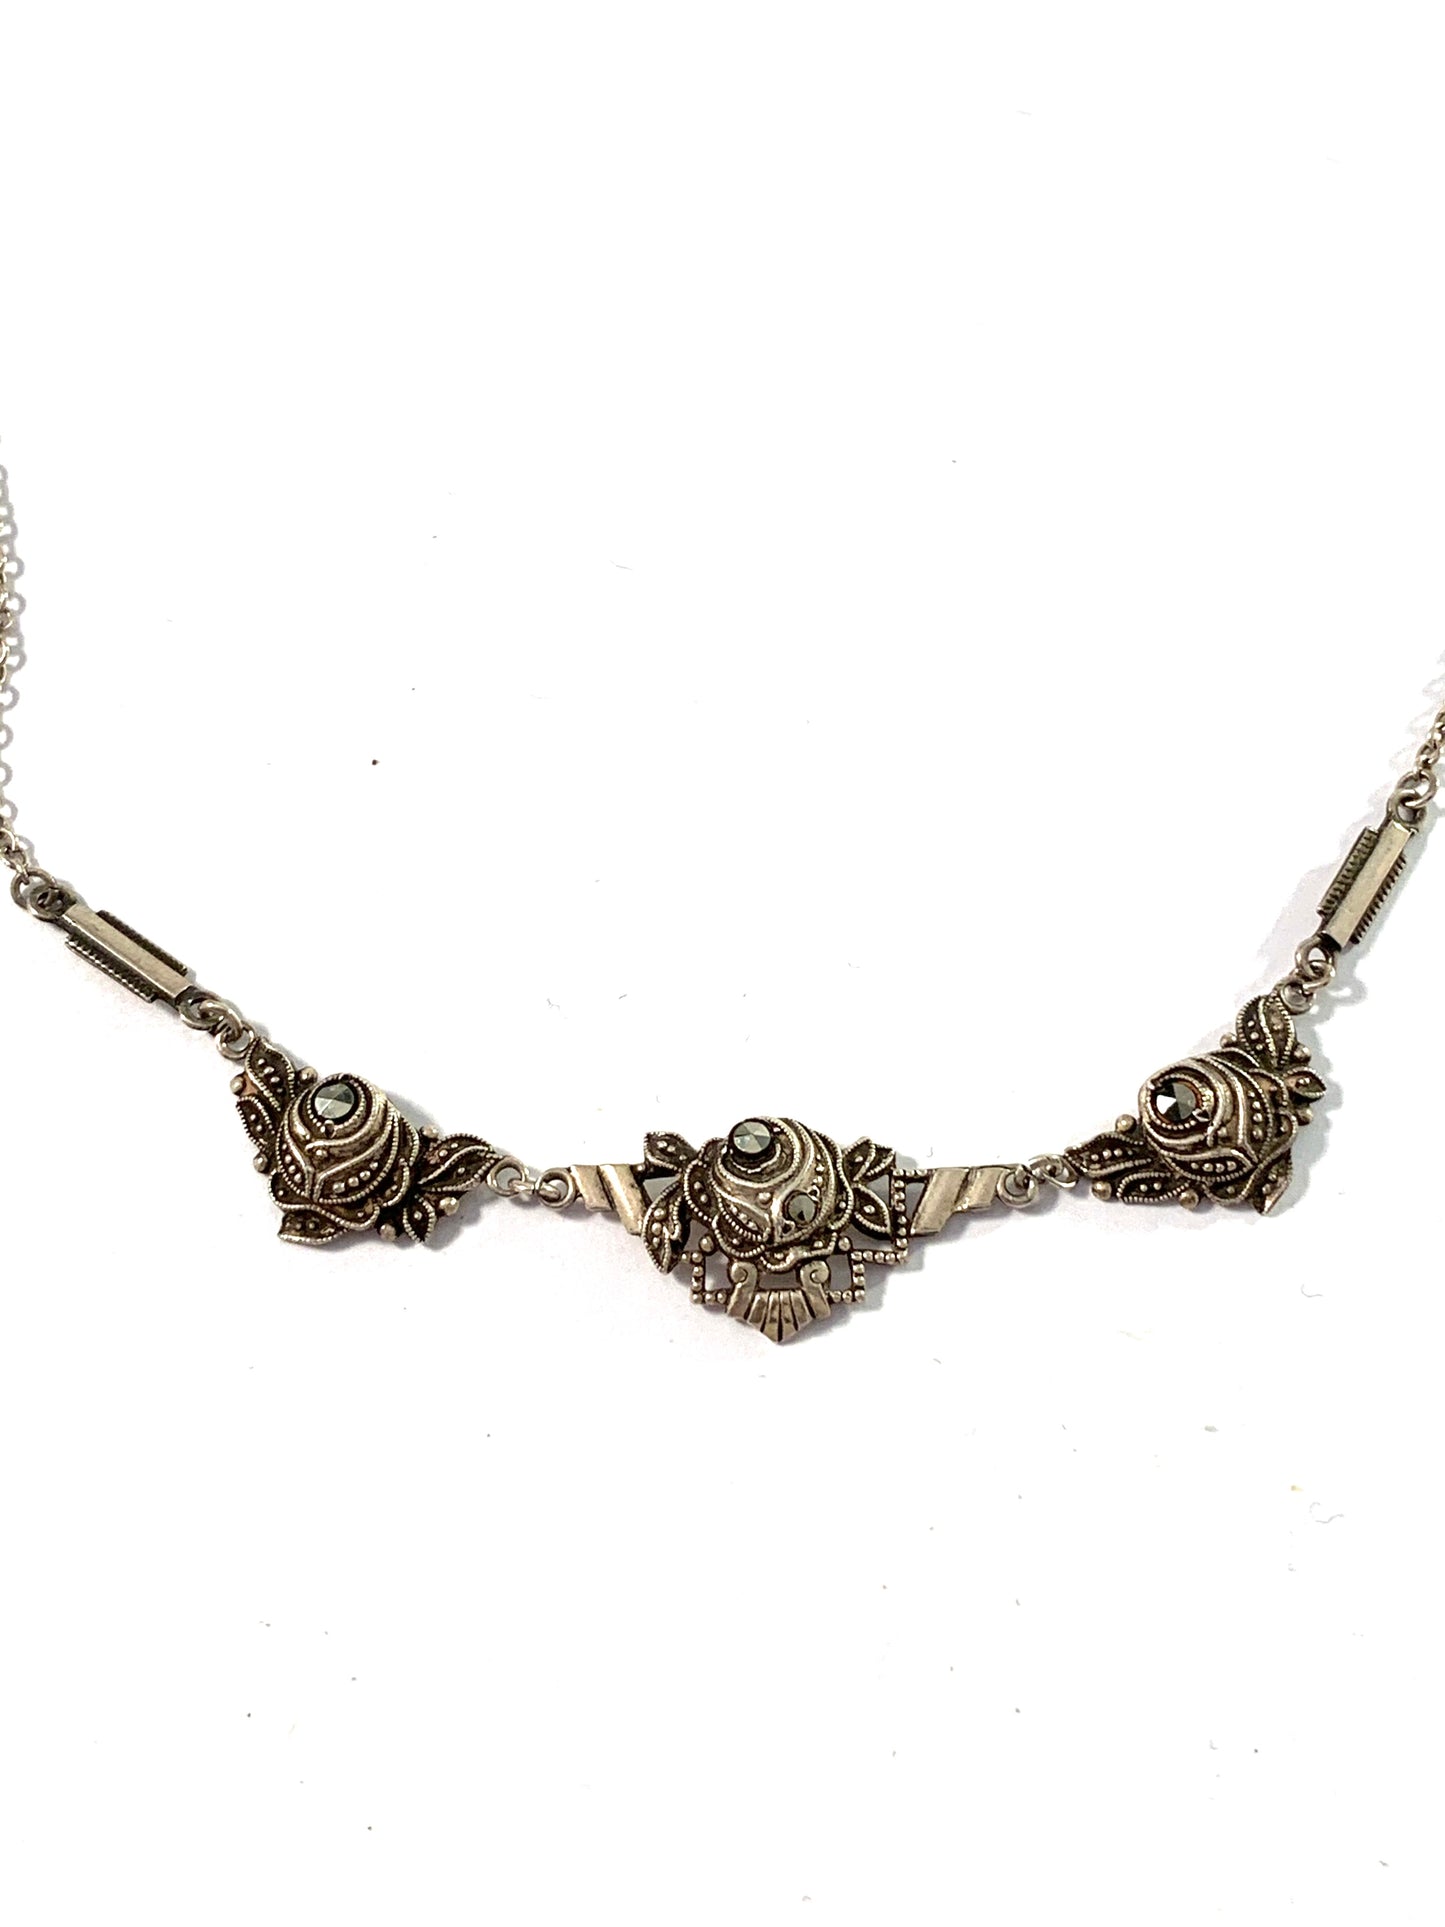 Hugo Grun, Sweden early 1900s Solid Silver Marcasite Flower Necklace.